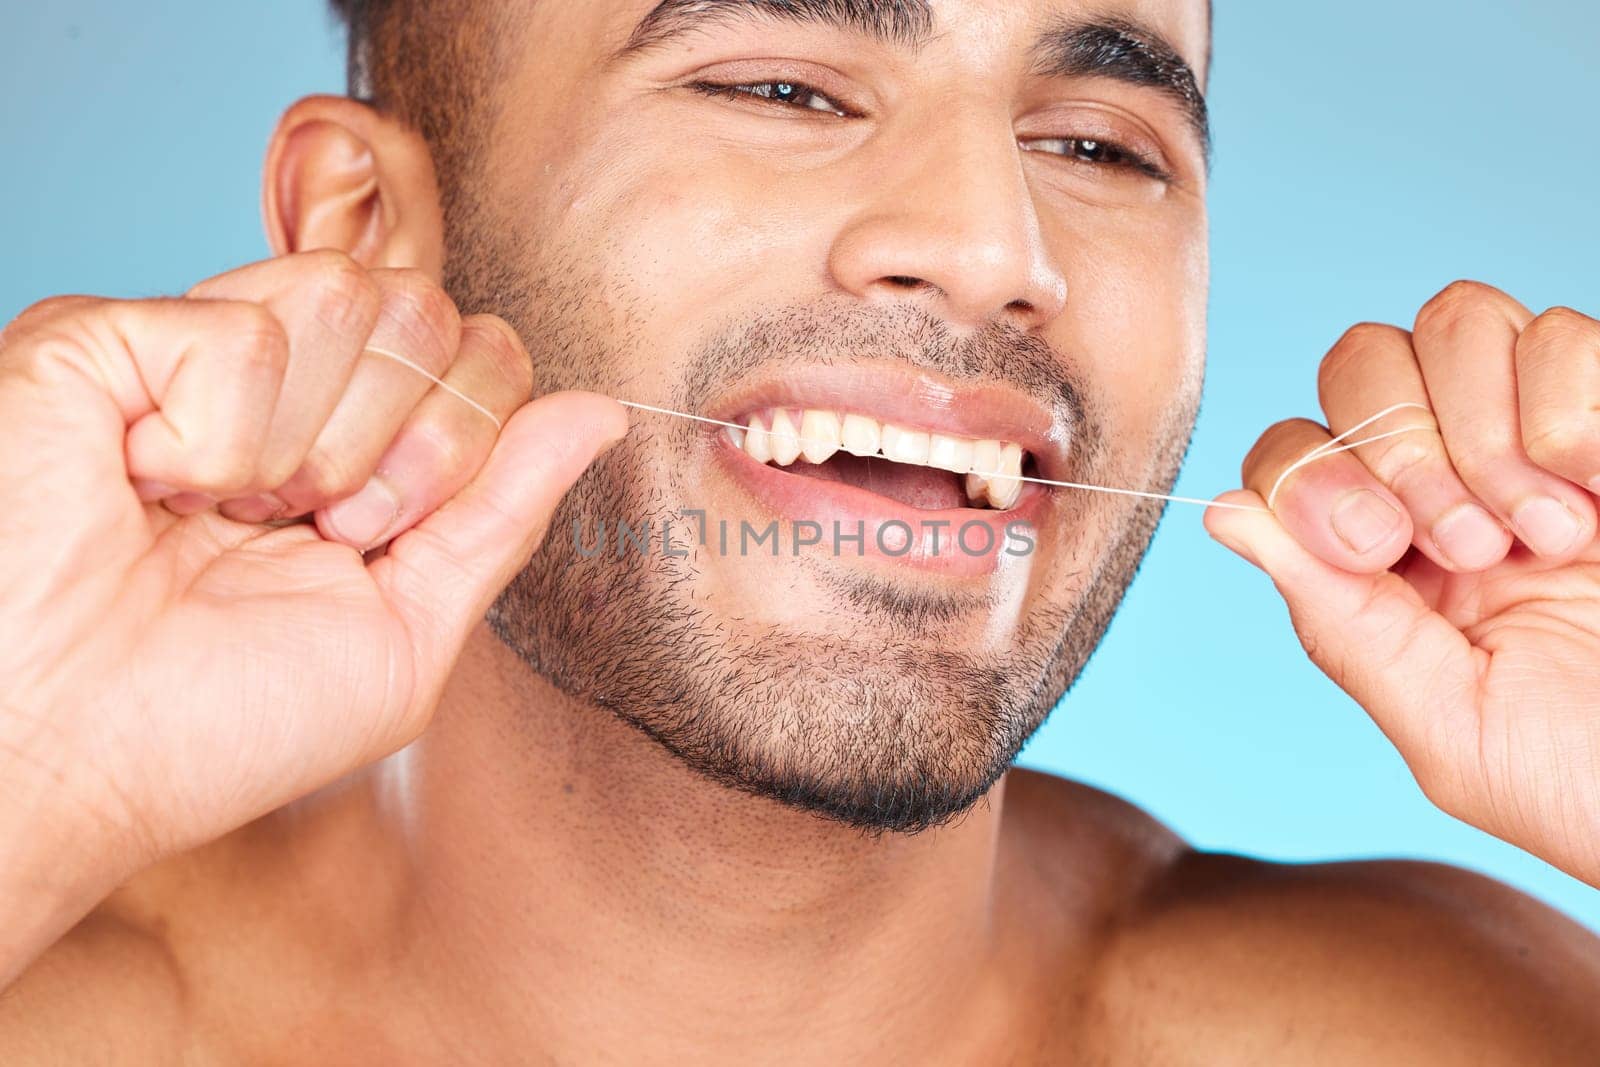 Face, dental and man floss teeth in studio isolated on blue background. Veneers, invisalign and male model from Brazil flossing, cleaning for wellness or mouth hygiene, oral care and tooth health